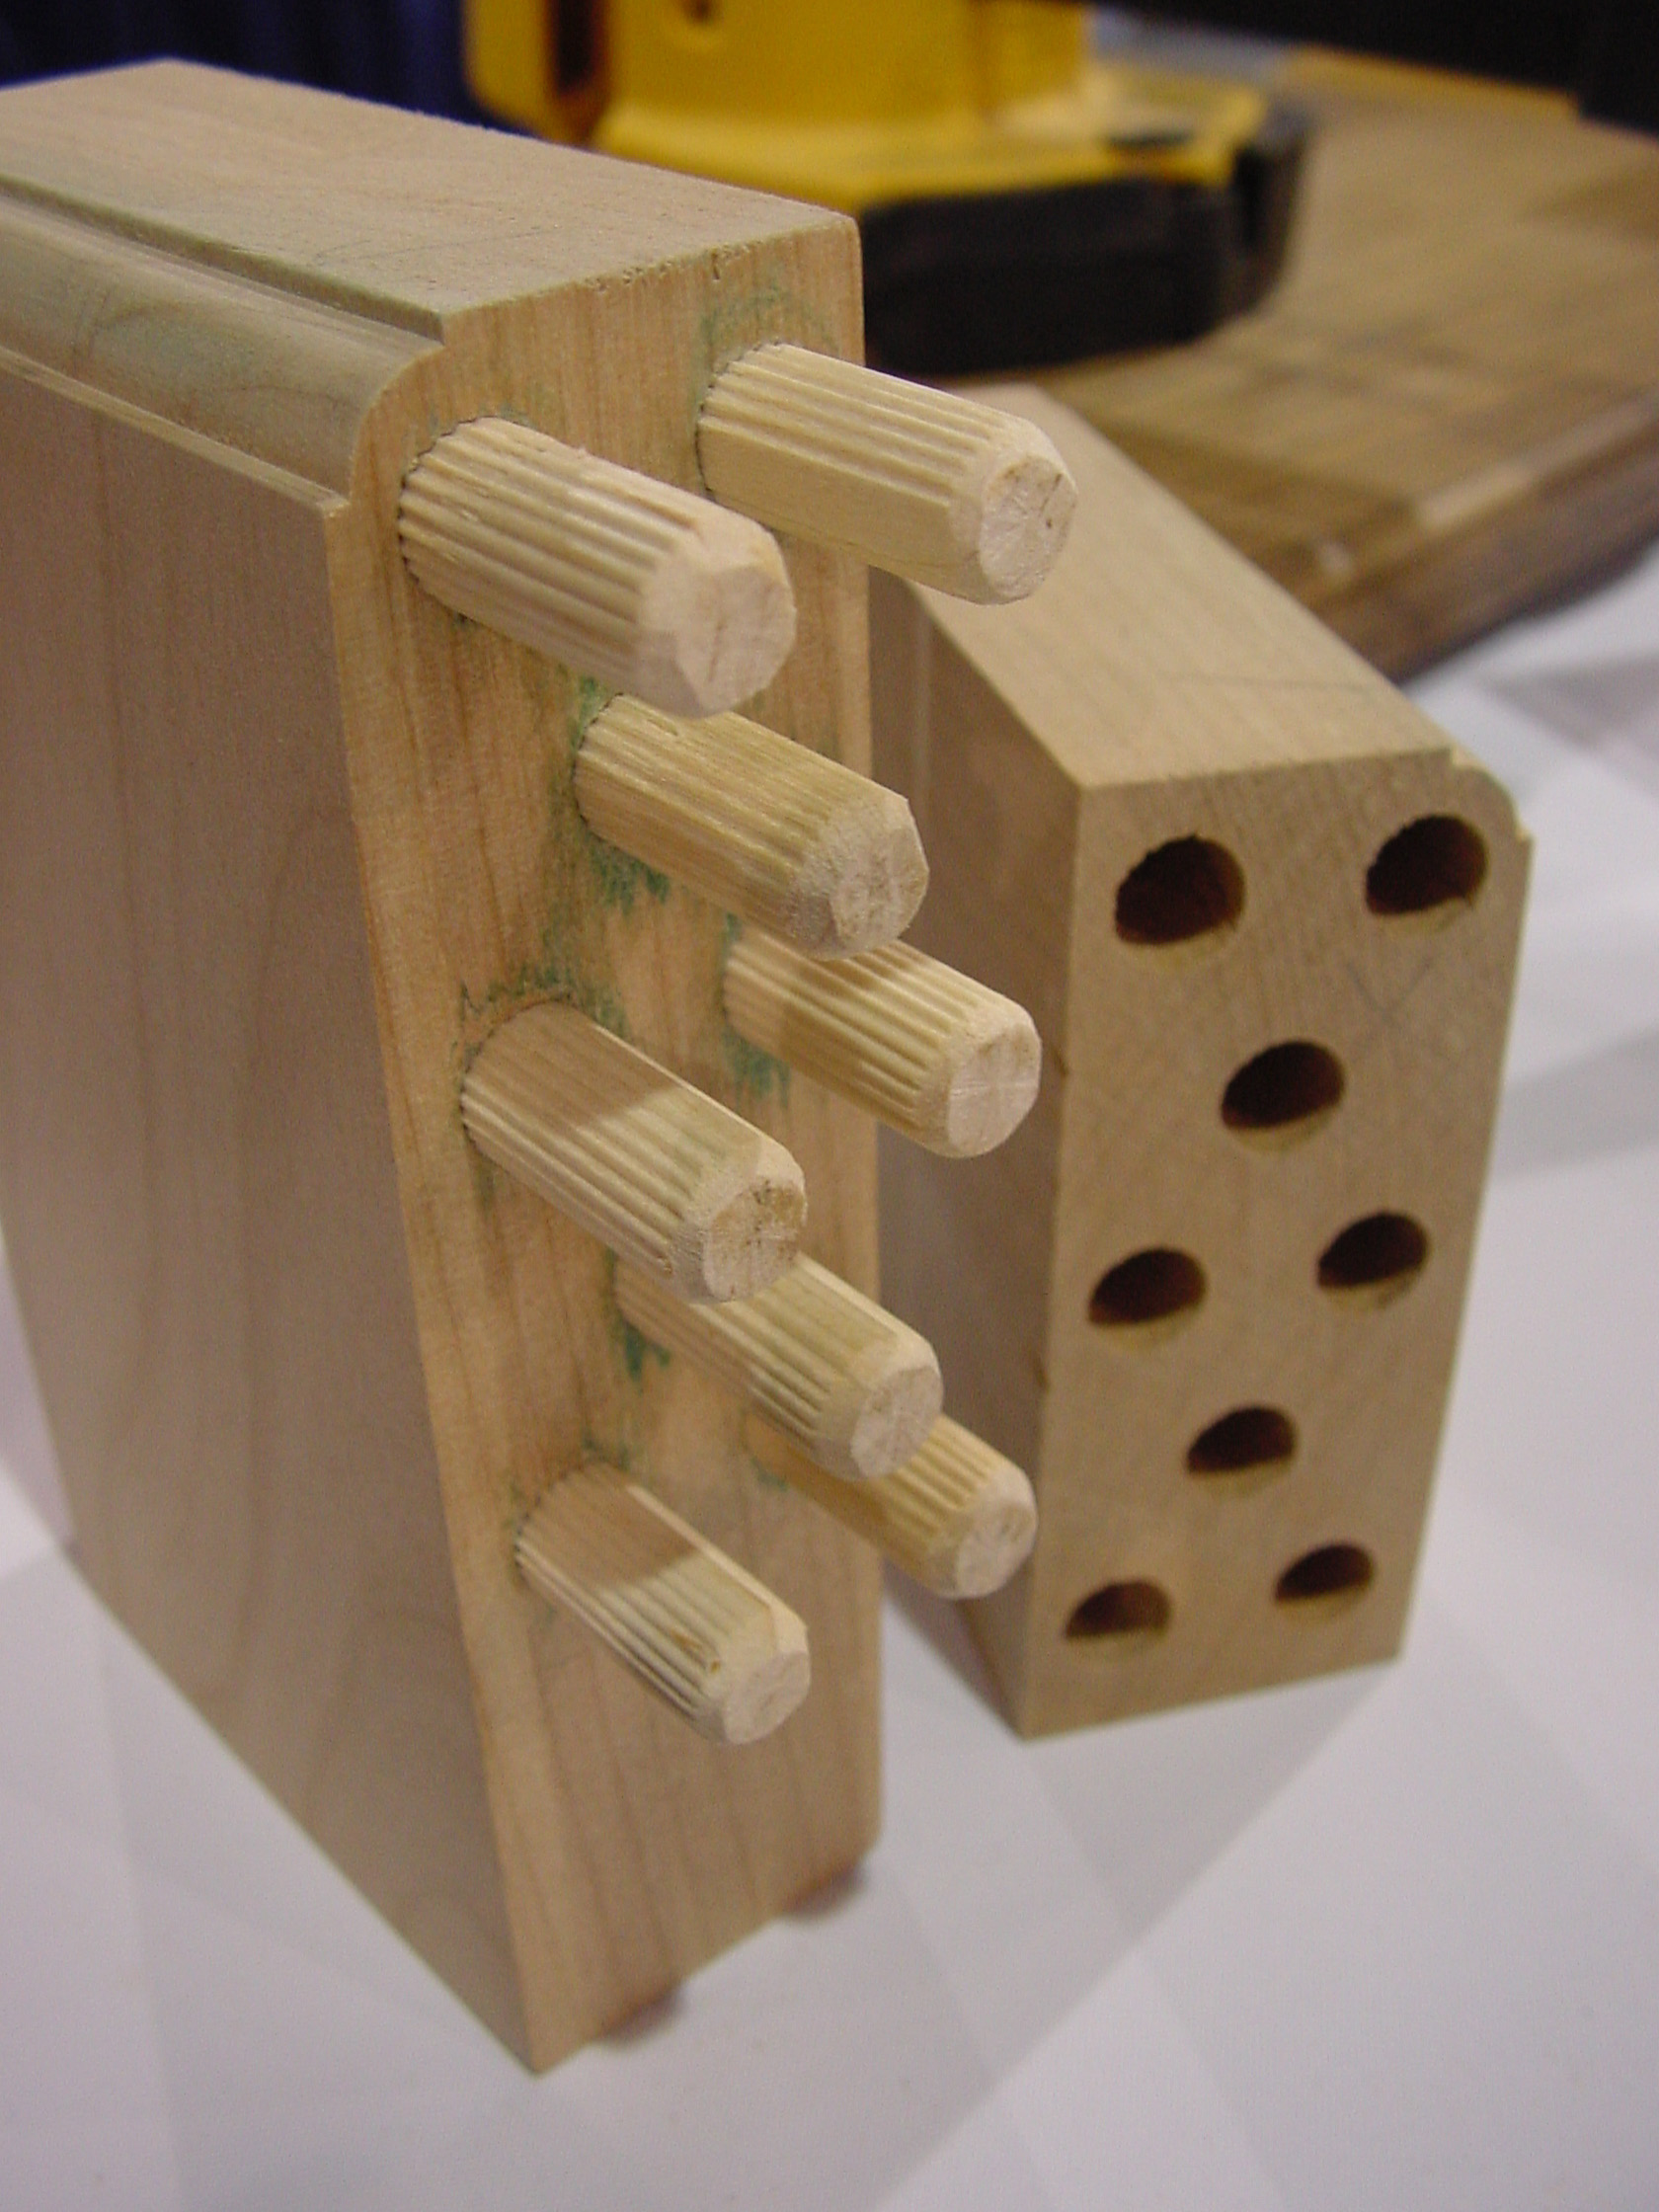 Woodworking joint